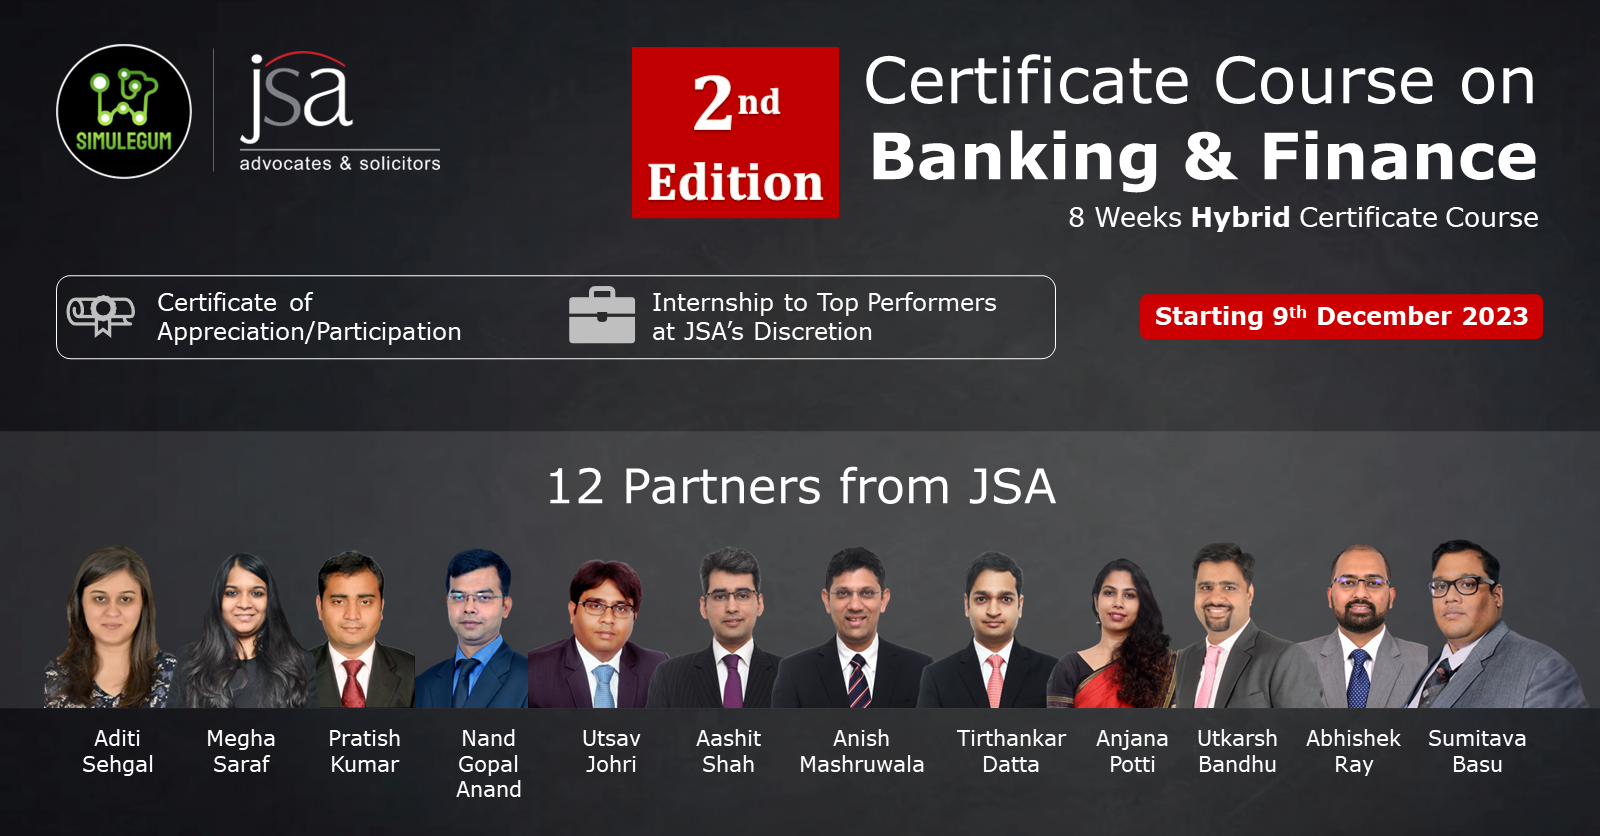 2nd Edition of the Certificate Course on Banking & Finance by JSA and SimuLegum